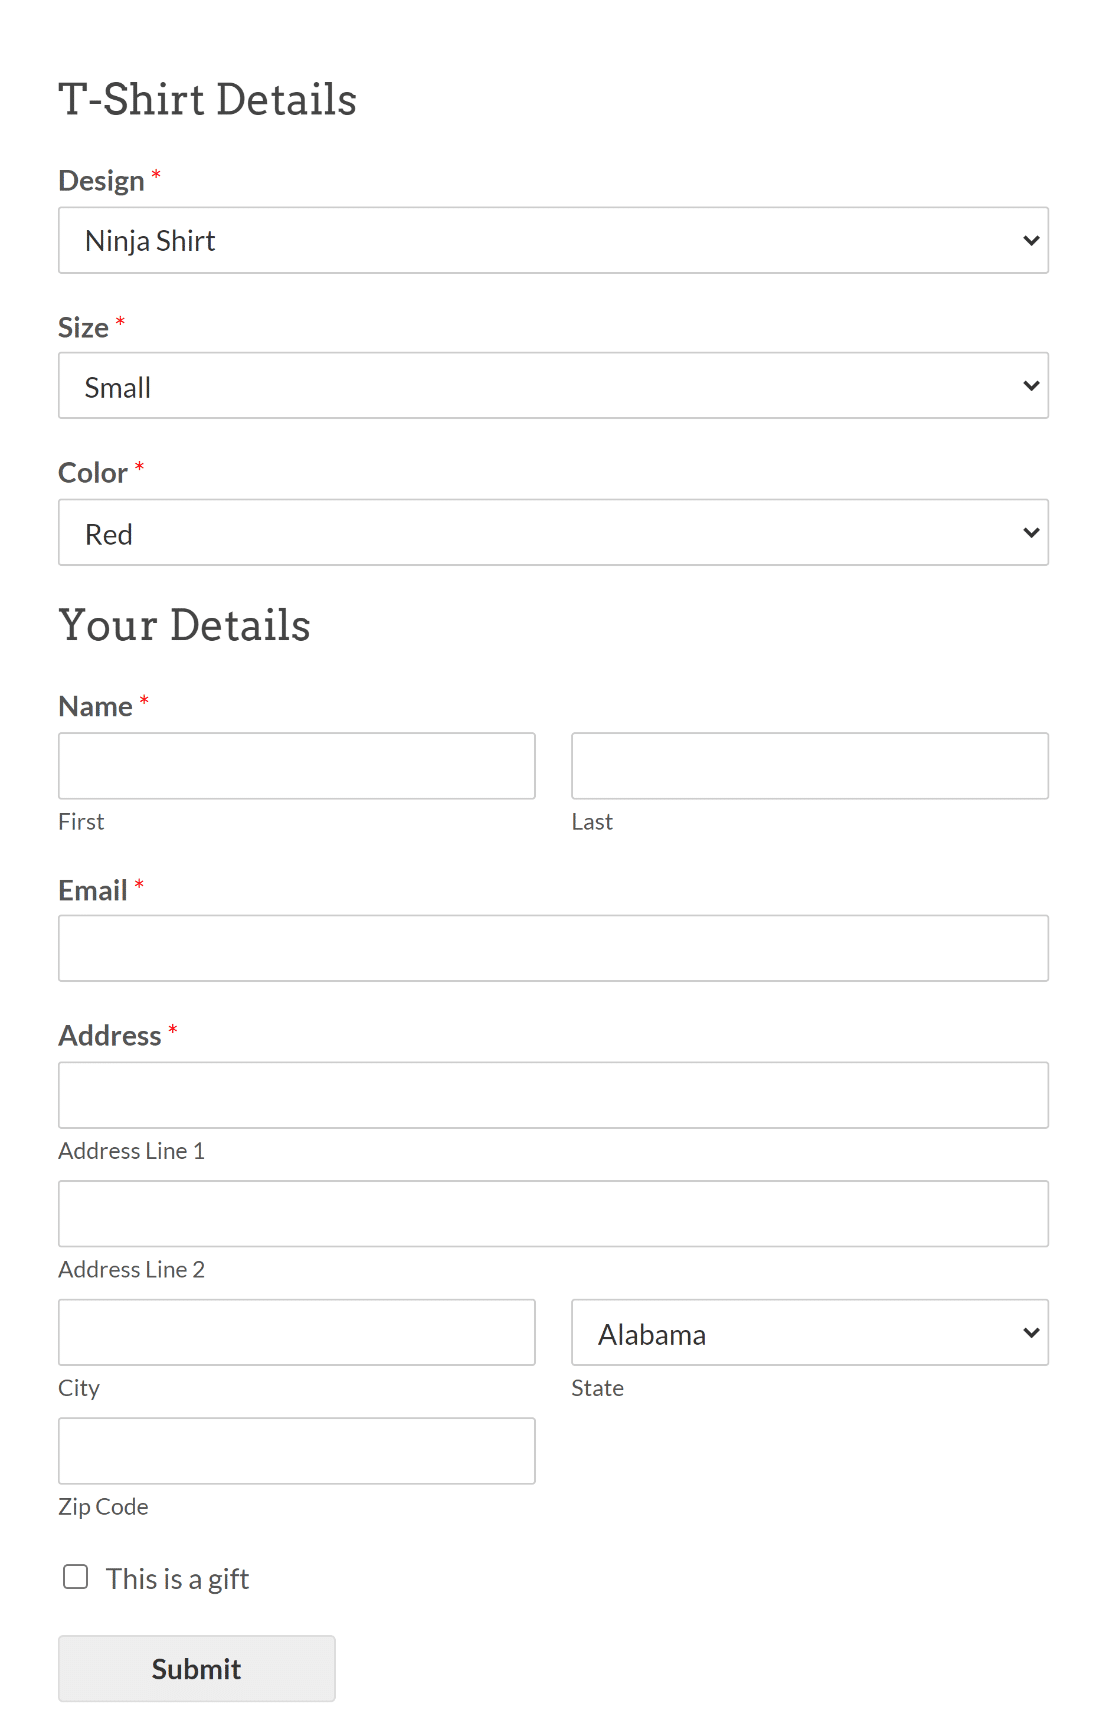 Tshirt order form template all fields